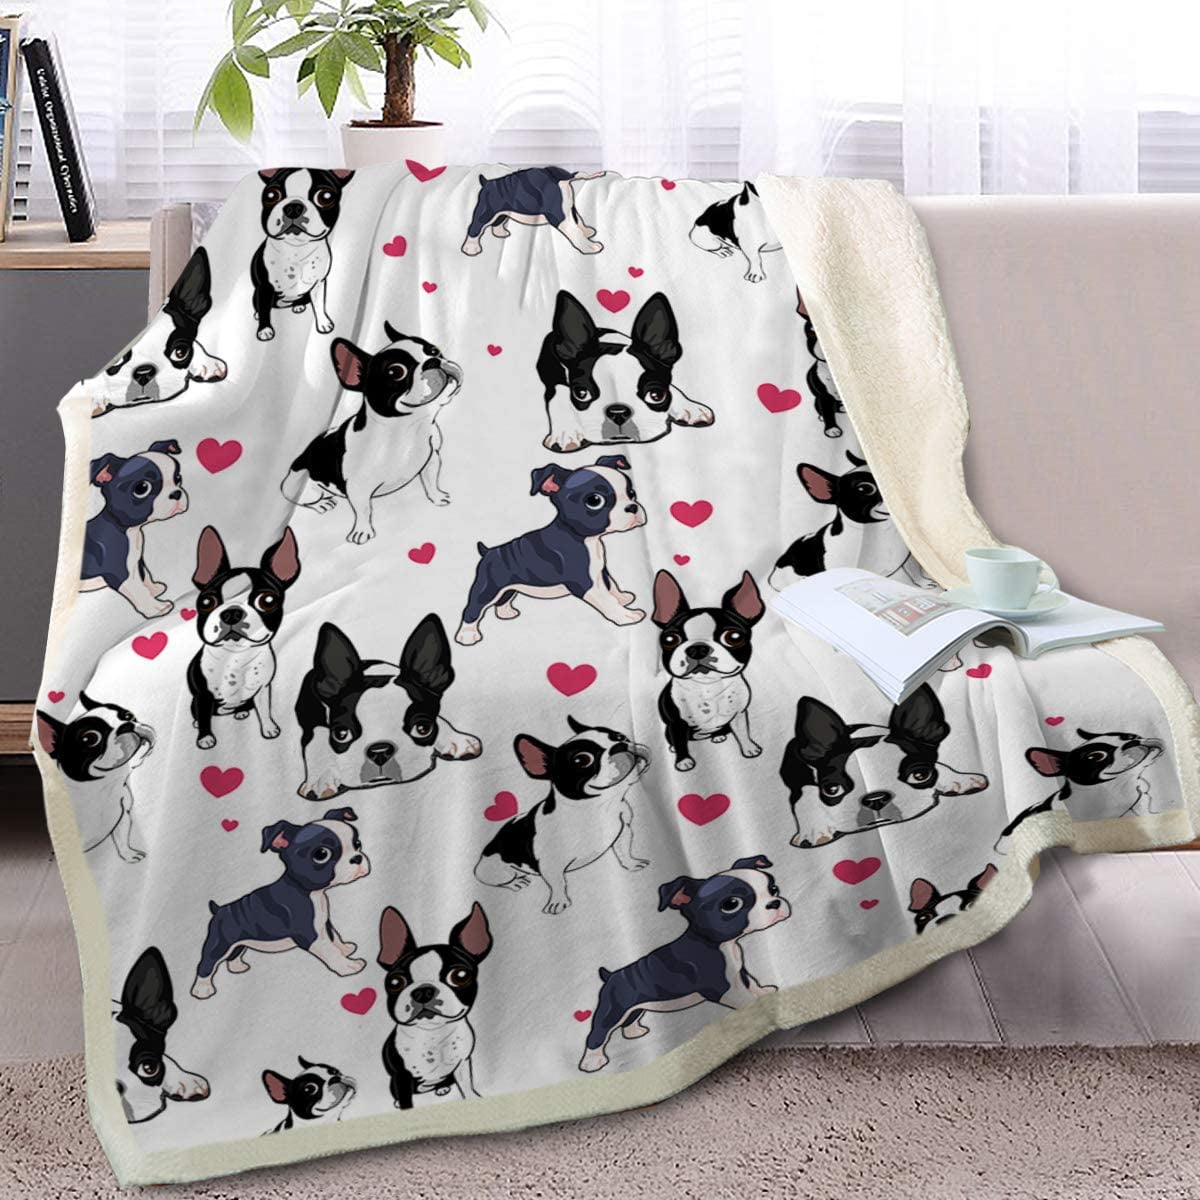 Boston Terrier Blanket Red Heart Dog Print Plush Blanket Cute Puppy Cozy Fleece  Blankets For Kids Adults Animal Lightweight Blanket Gift For Pet Lovers  Black And White 50 X 60 Inch - Walmart.com